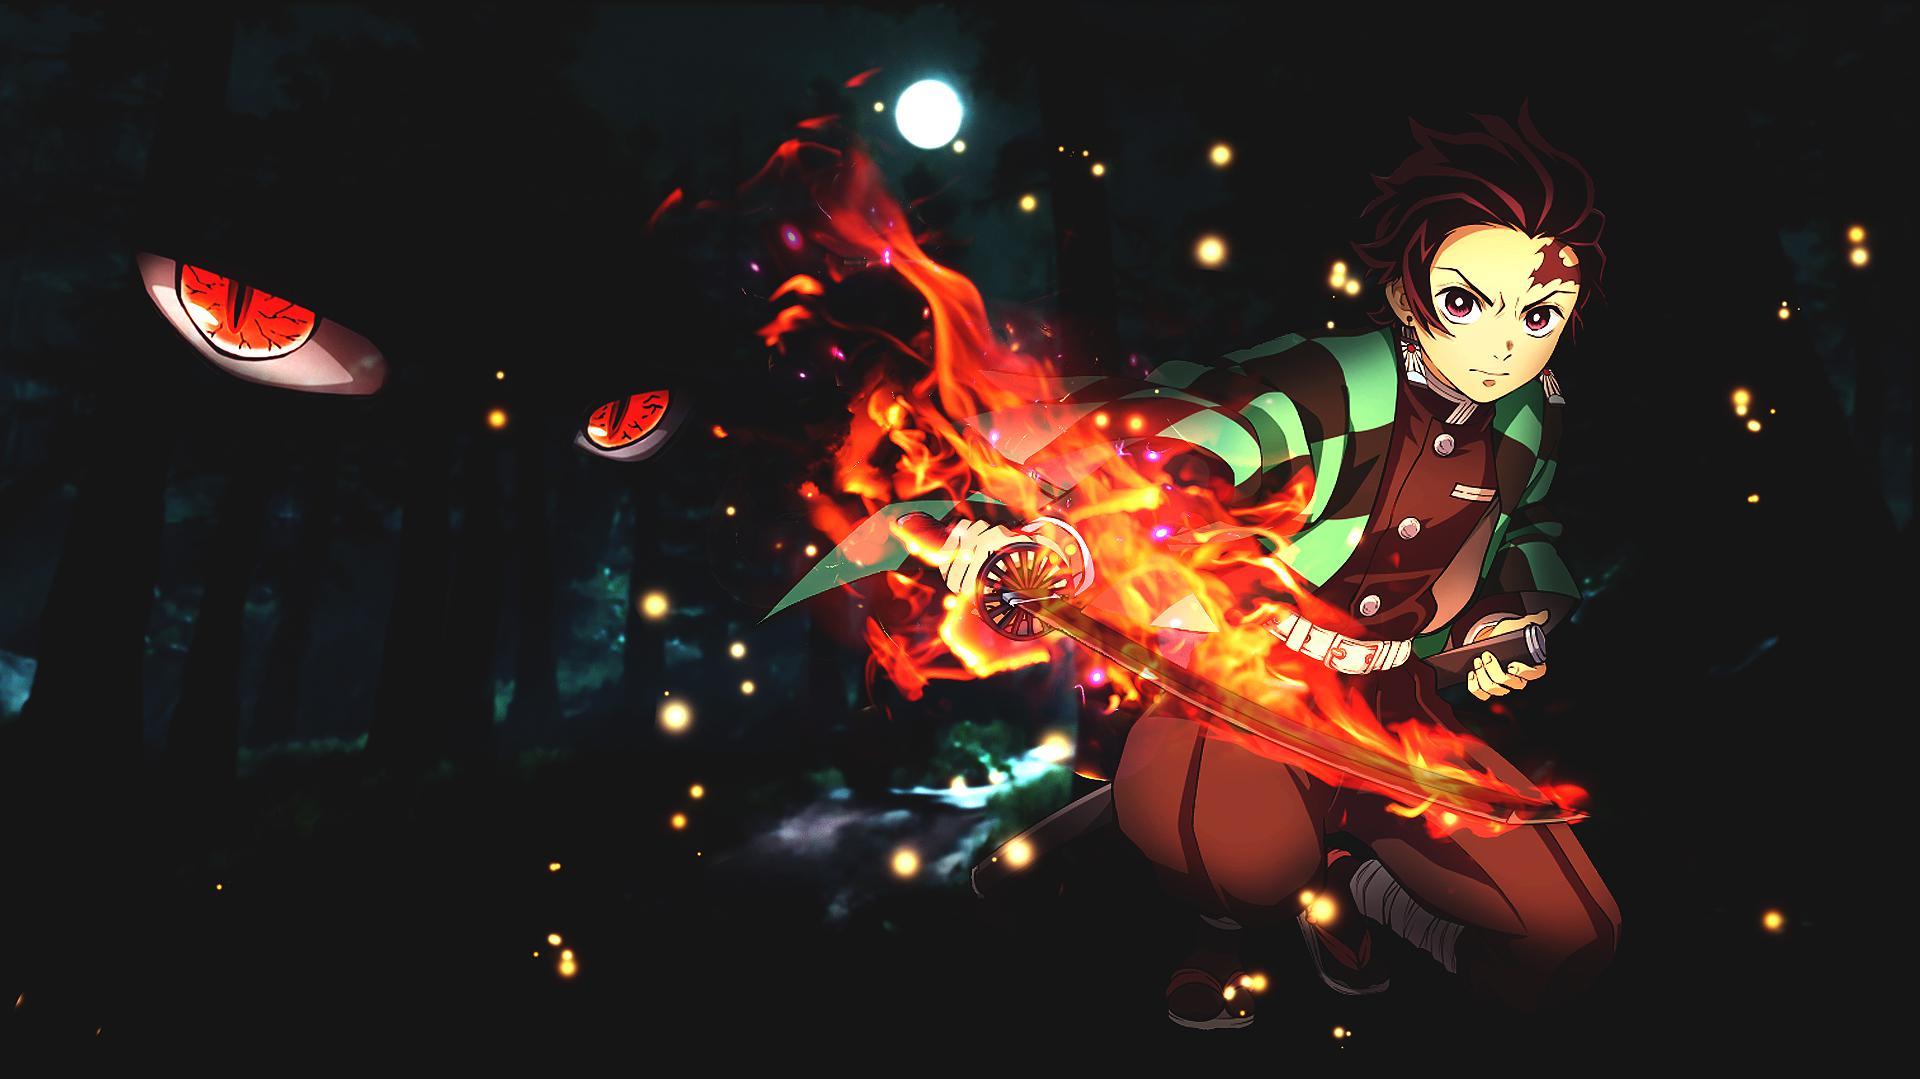 I love Demon Slayer so i tried to do a wallpaper of it Not my